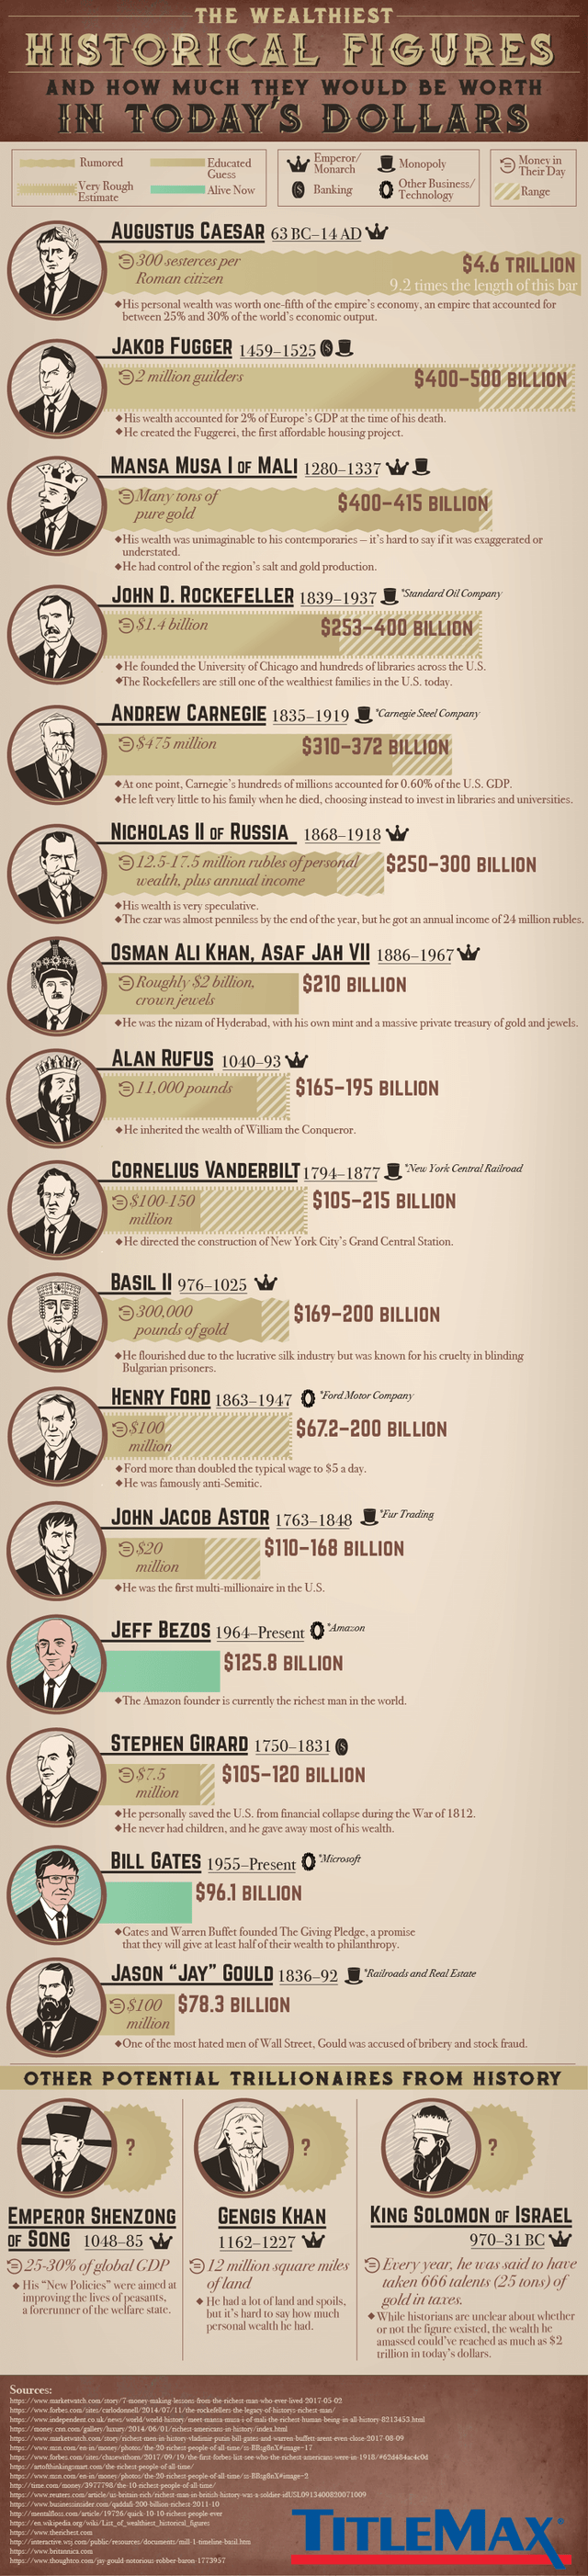 richest people in history infographic - Historical Figures Rola